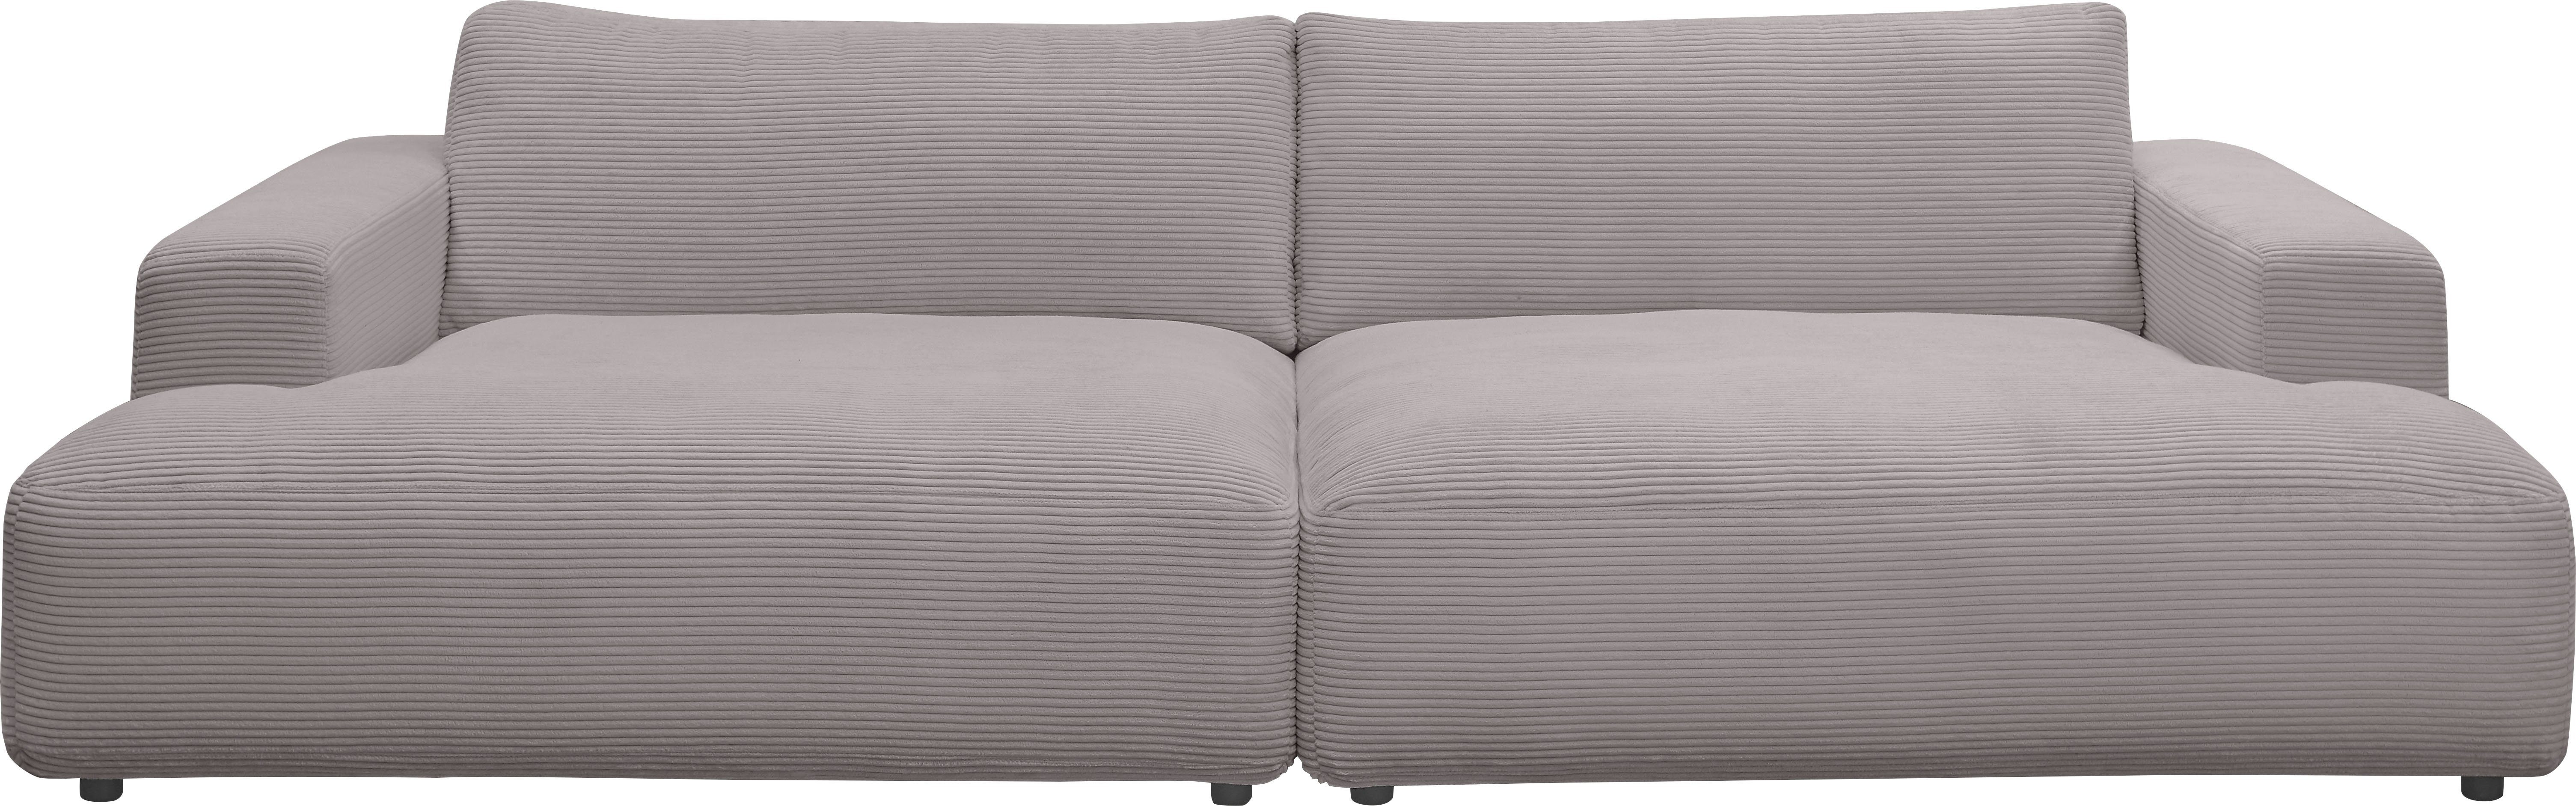 GALLERY M cm Lucia, Cord-Bezug, by Musterring Breite grey 292 branded Loungesofa